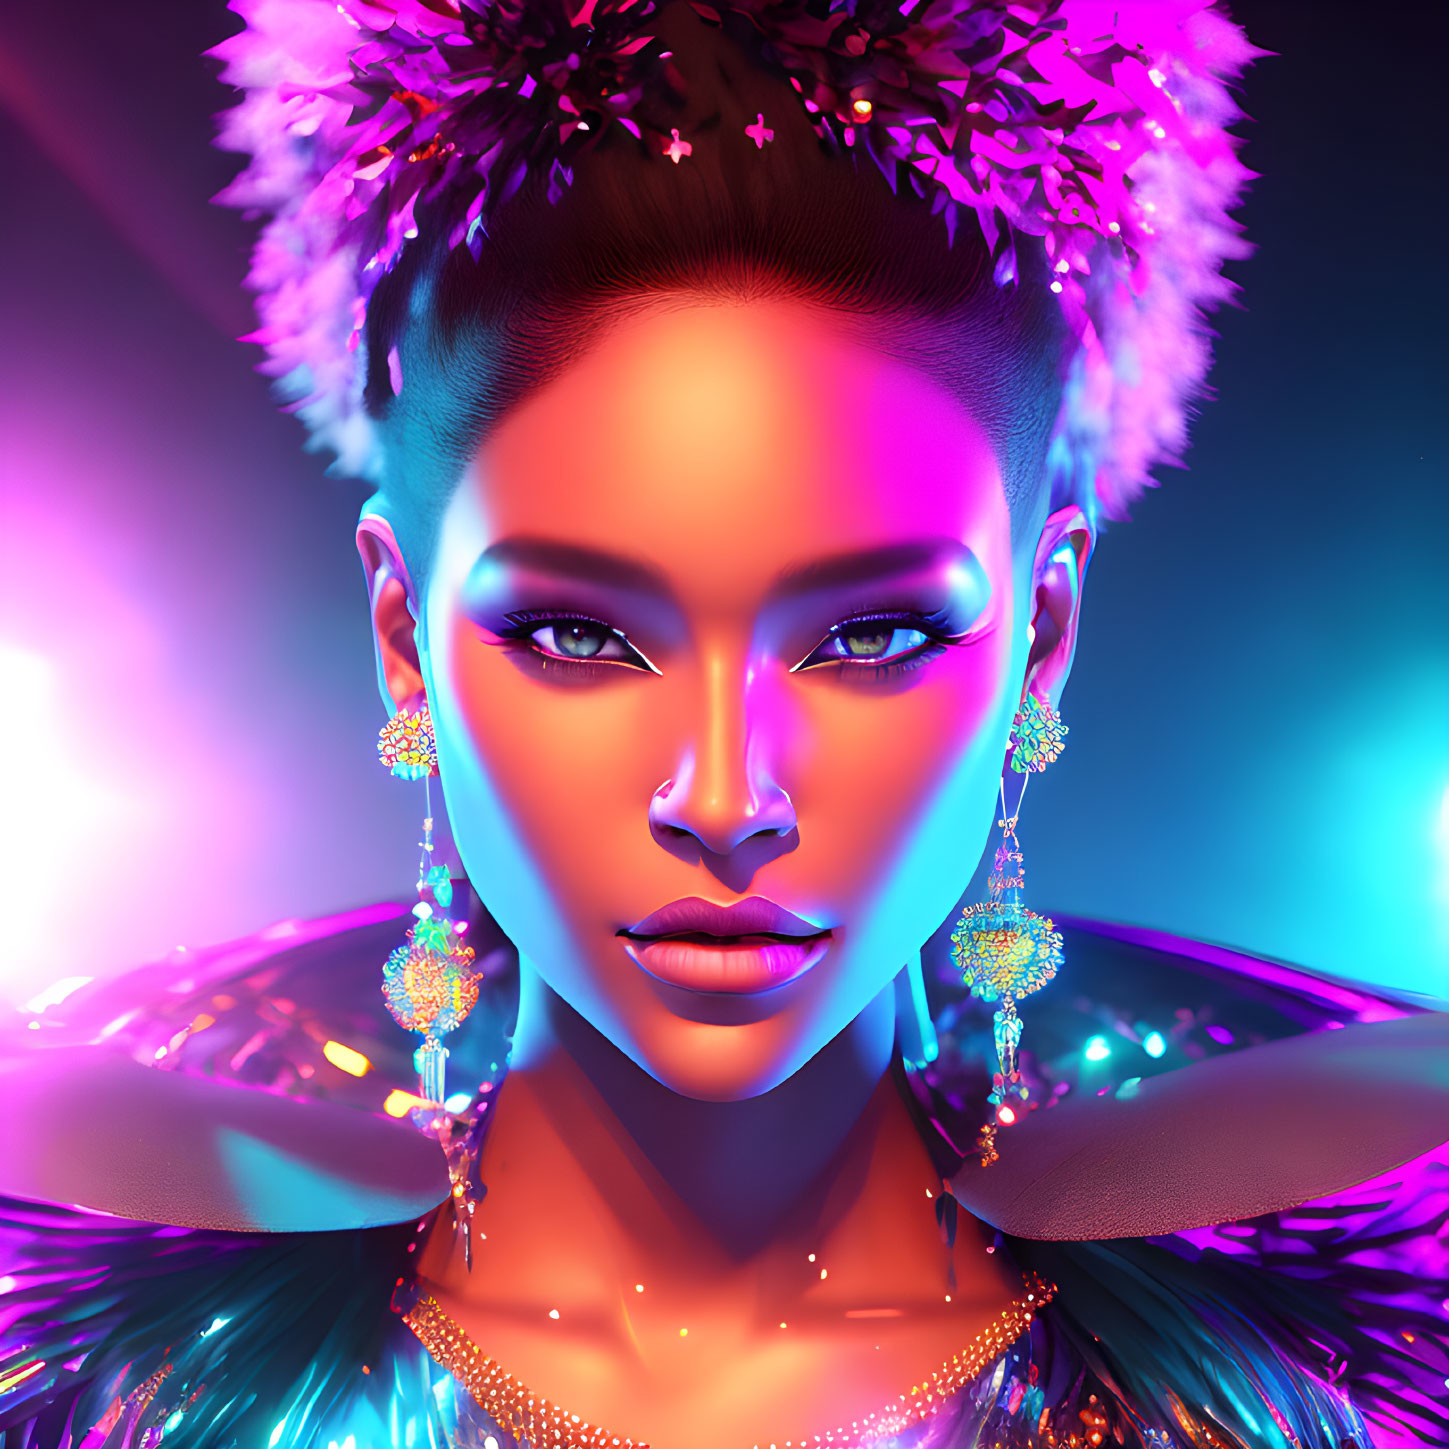 Digital portrait of woman with glowing makeup and shimmering garment in neon-lit setting